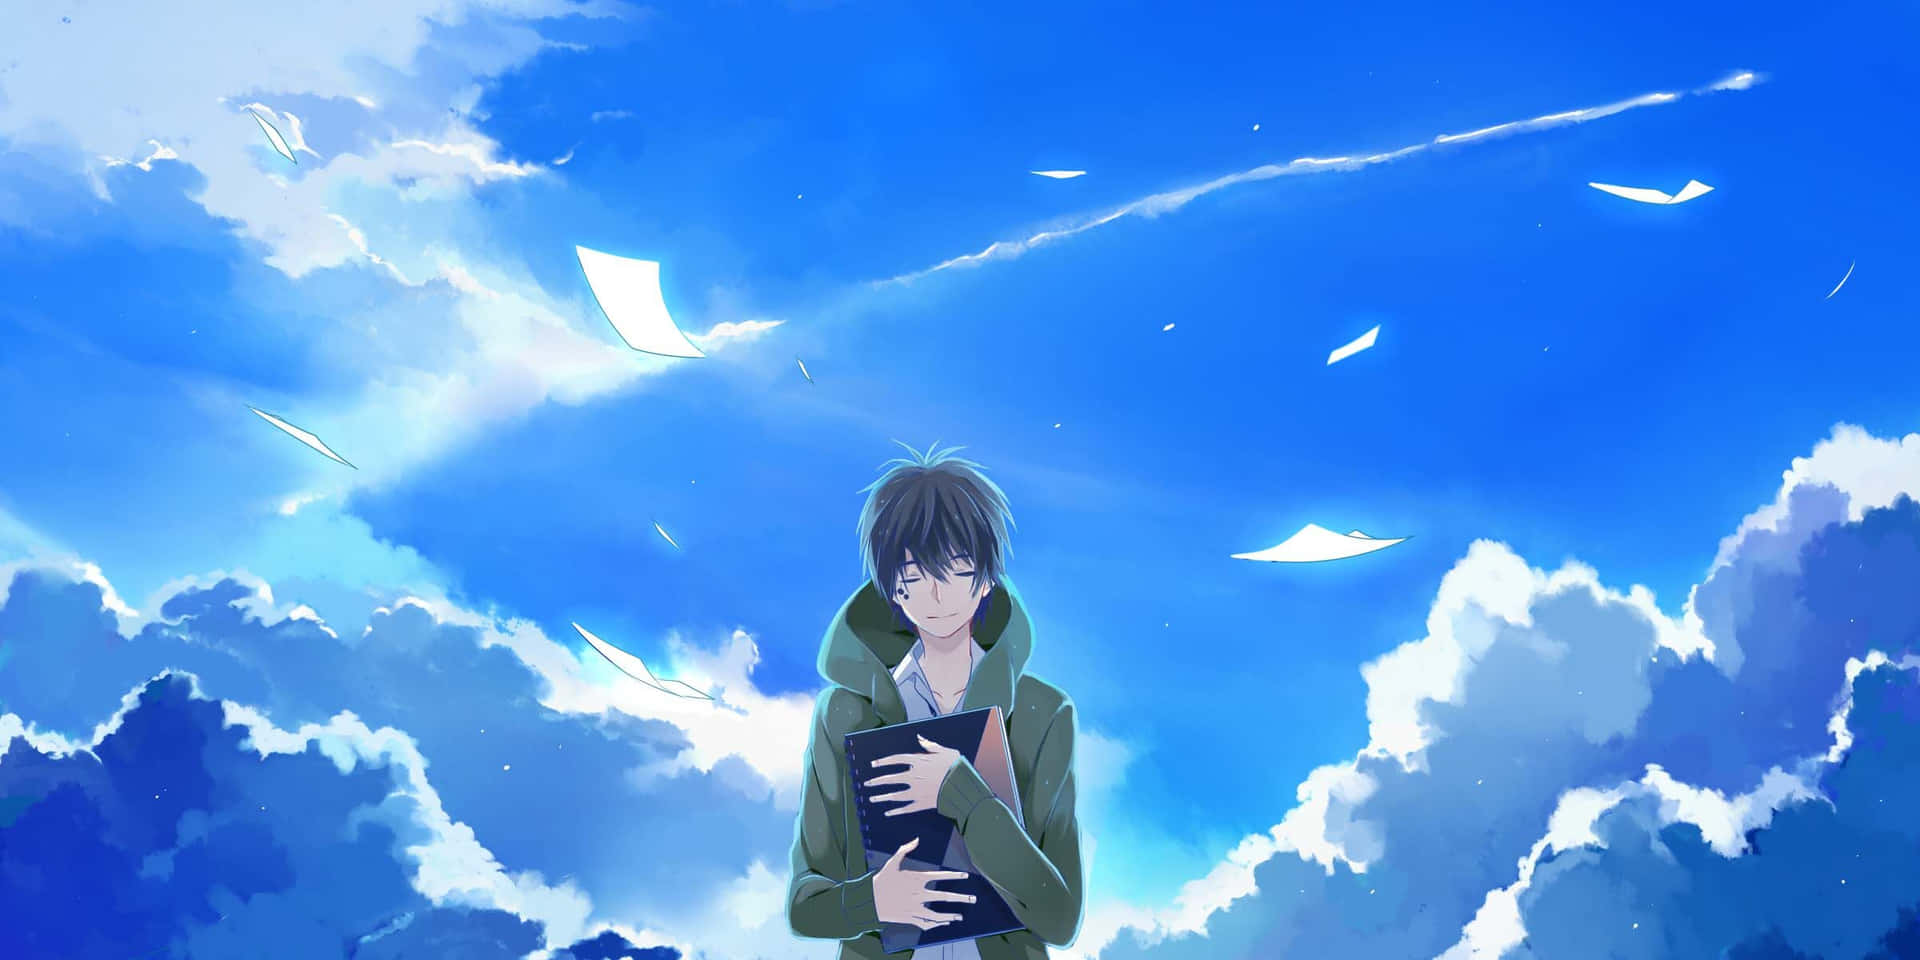 Contemplative Anime Character Under Blue Sky Wallpaper